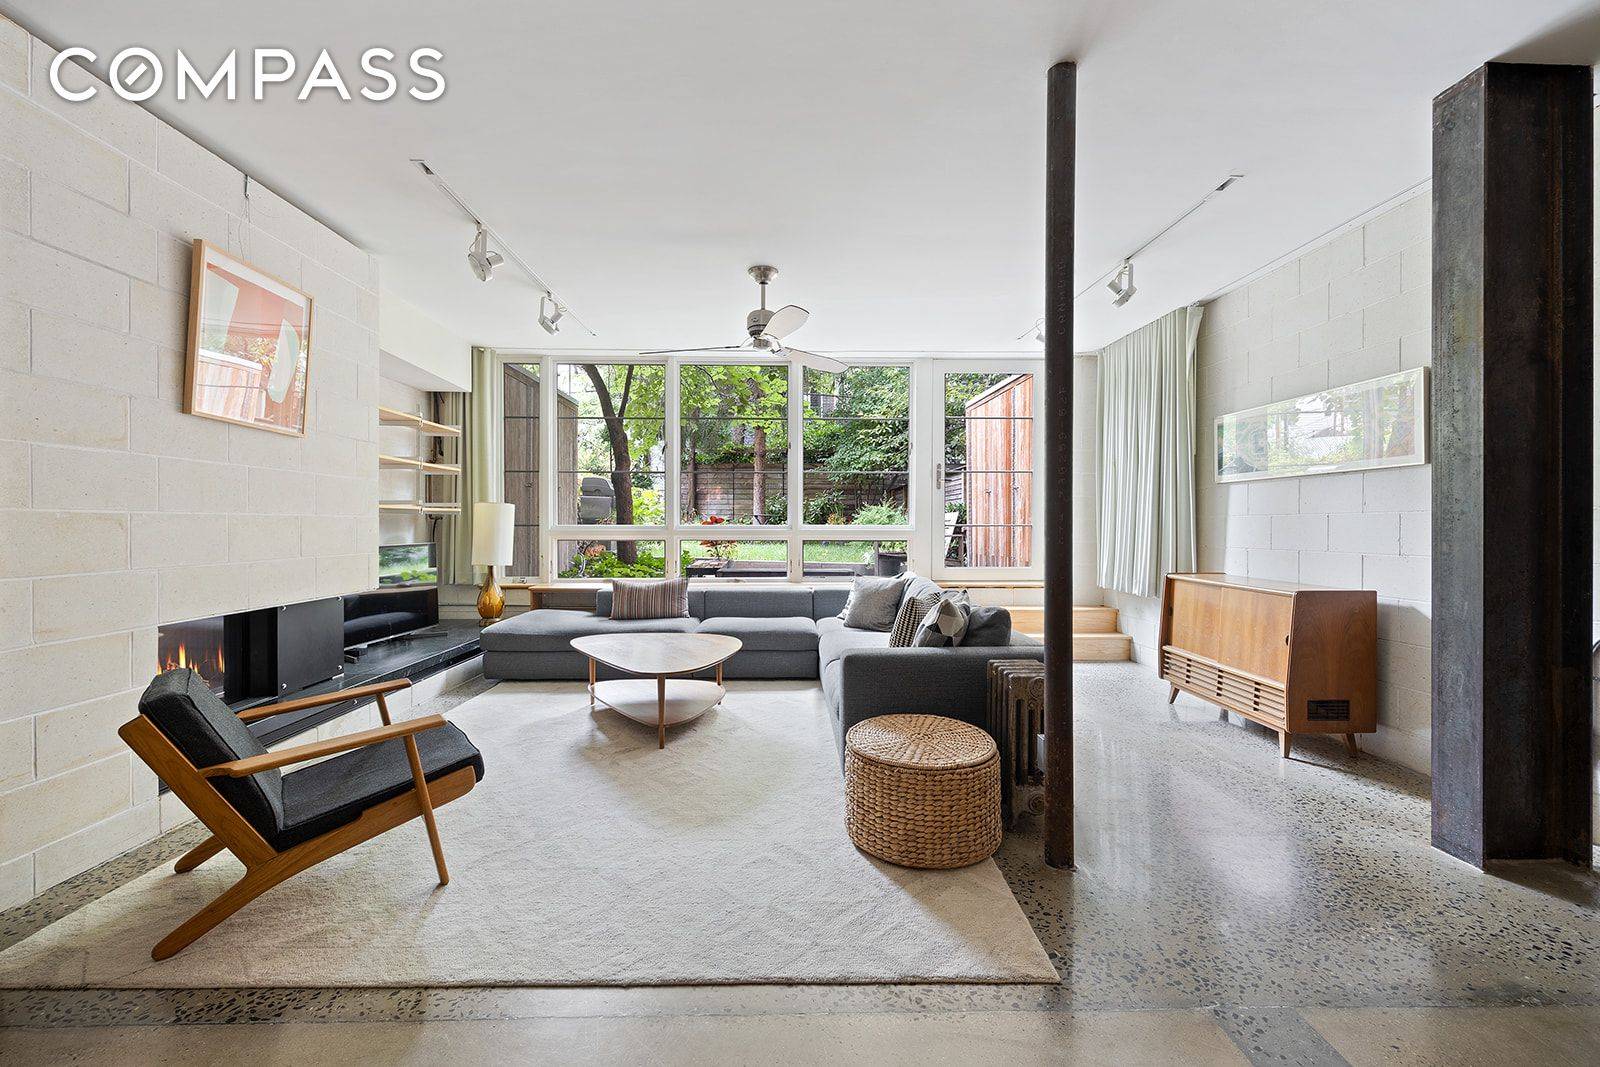 Chic loft living meets private outdoor space in this sprawling three bedroom, two bathroom garden duplex with an expansive, landscaped backyard in the perfect Greenpoint location.